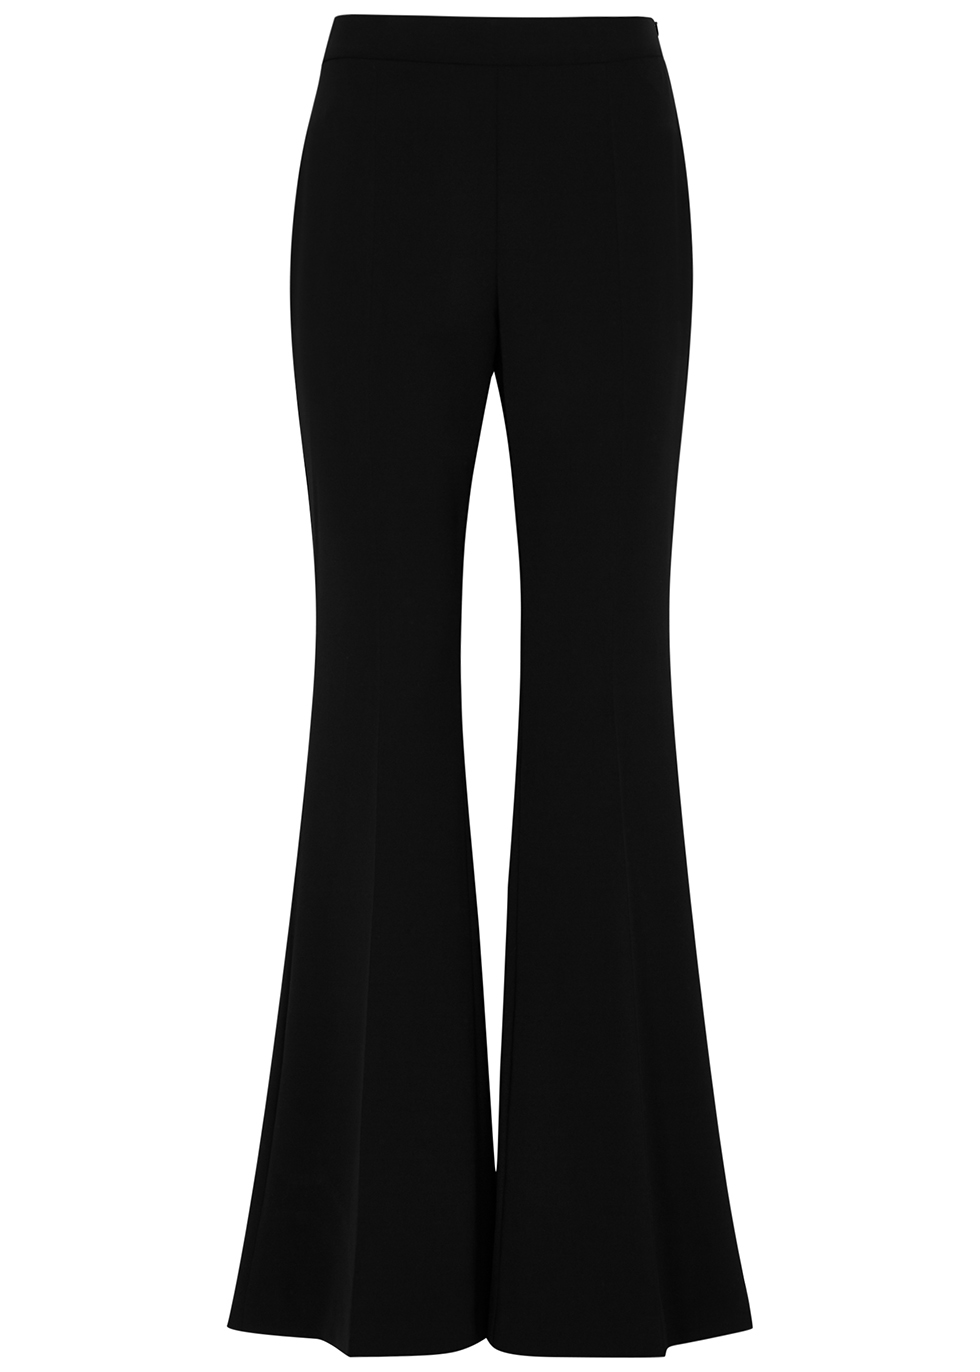 Boutique Moschino Black flared trousers - Harvey Nichols